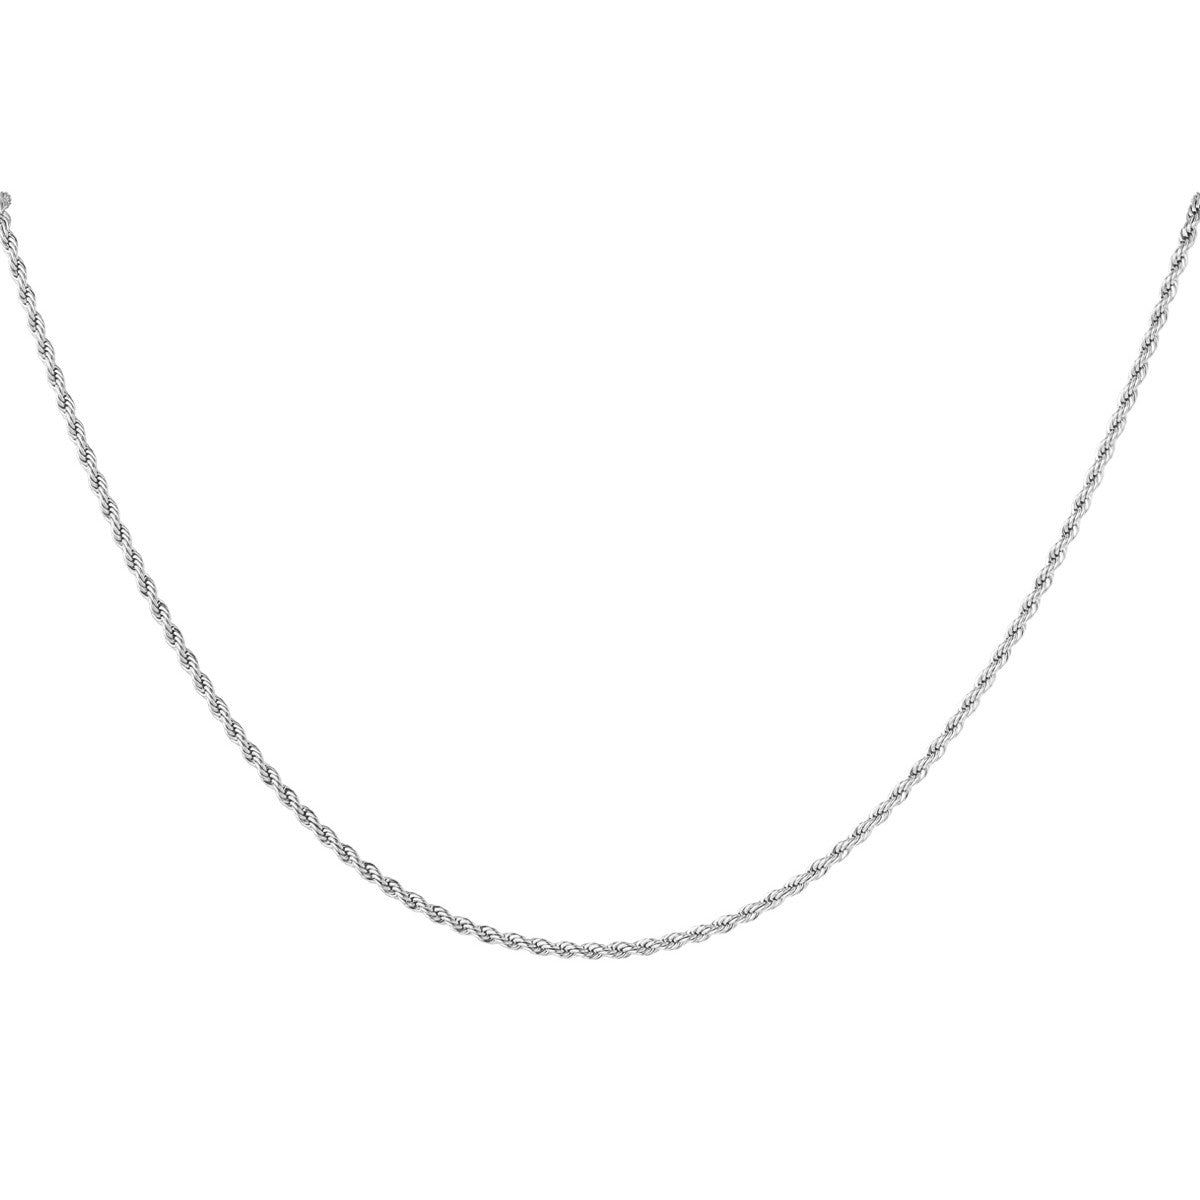 Necklace classic chain